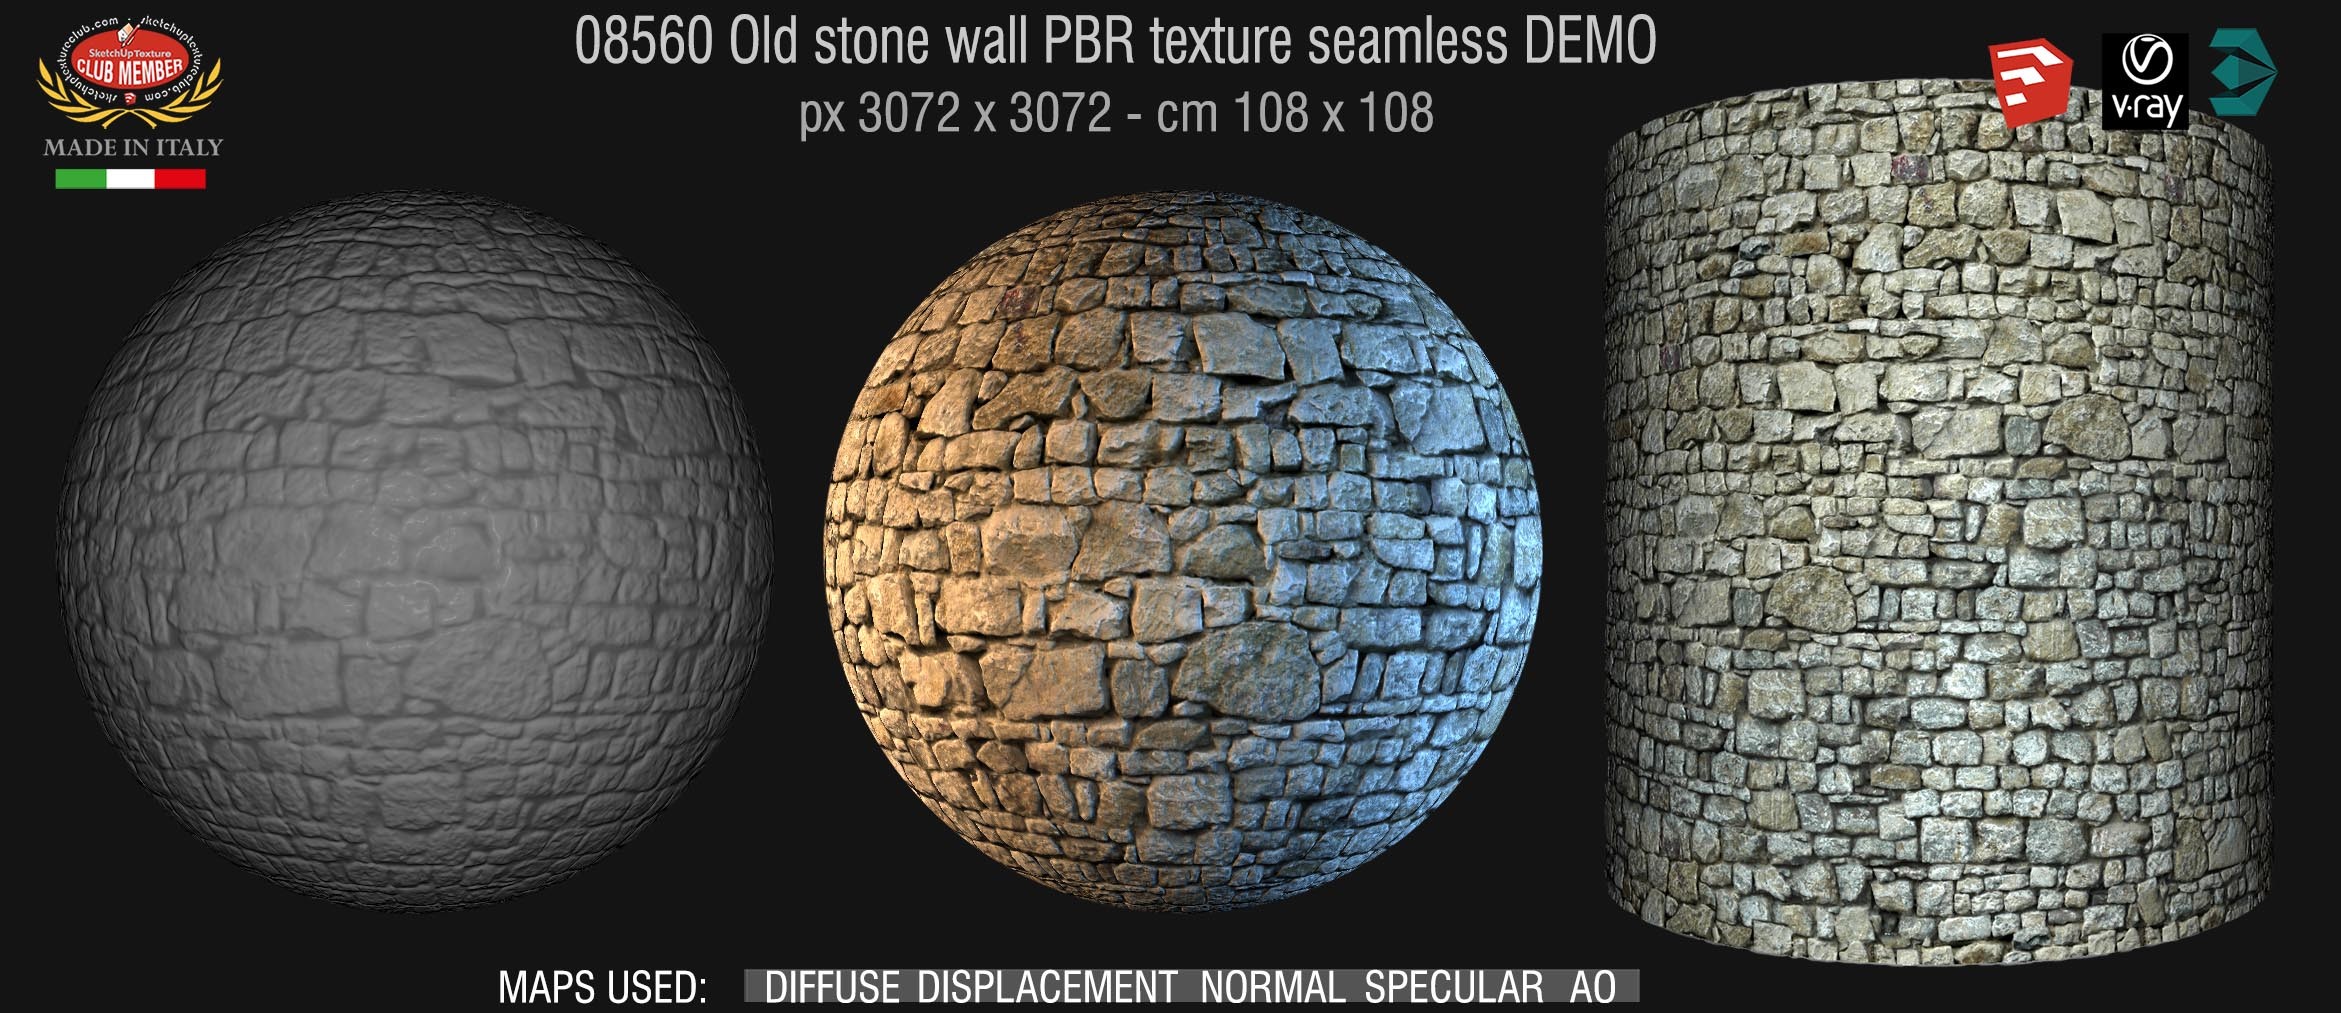 08560 Old stone wall PBR texture seamless DEMO